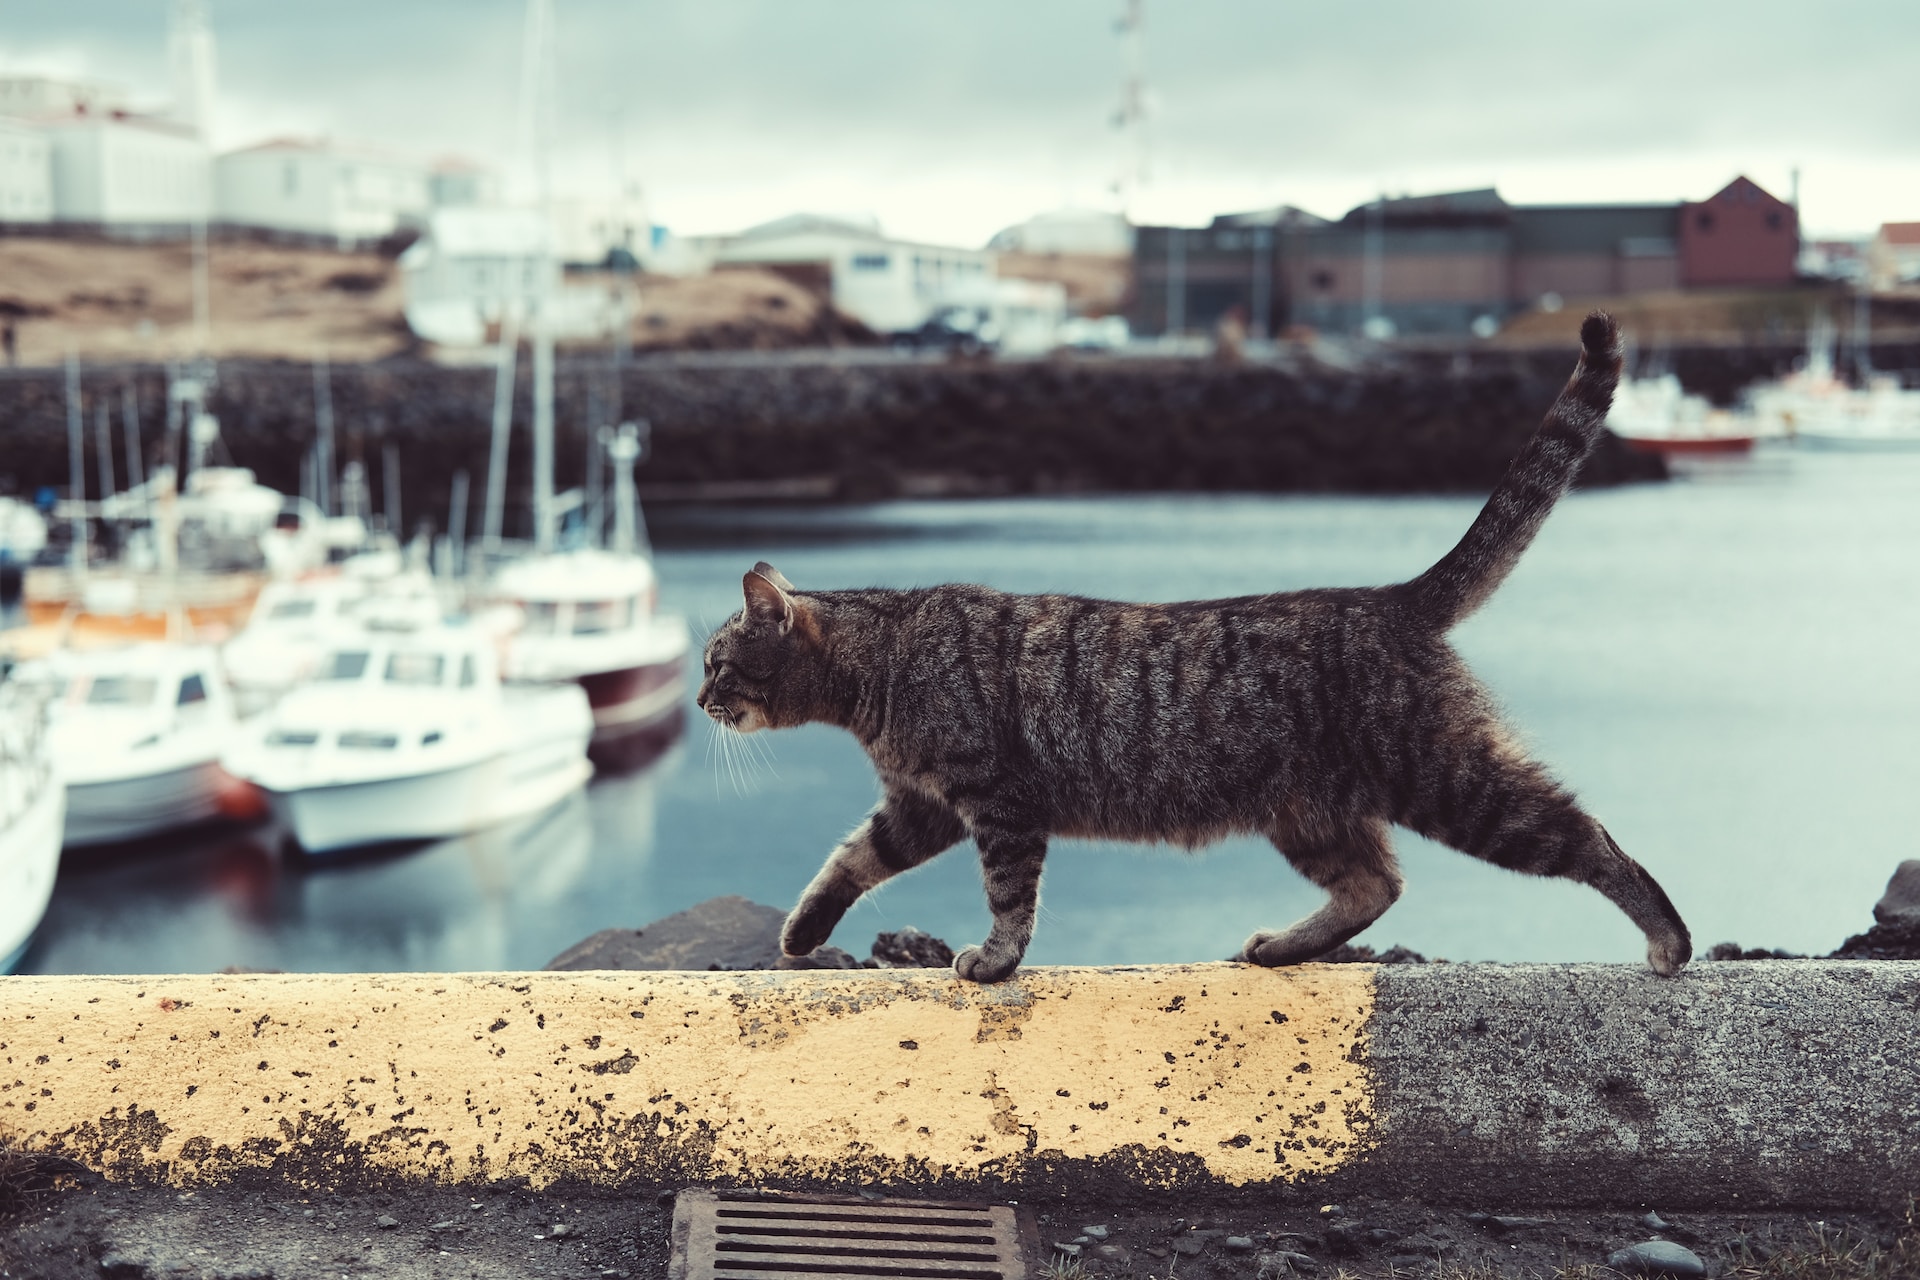 Why Ships Used to Have Cats Onboard